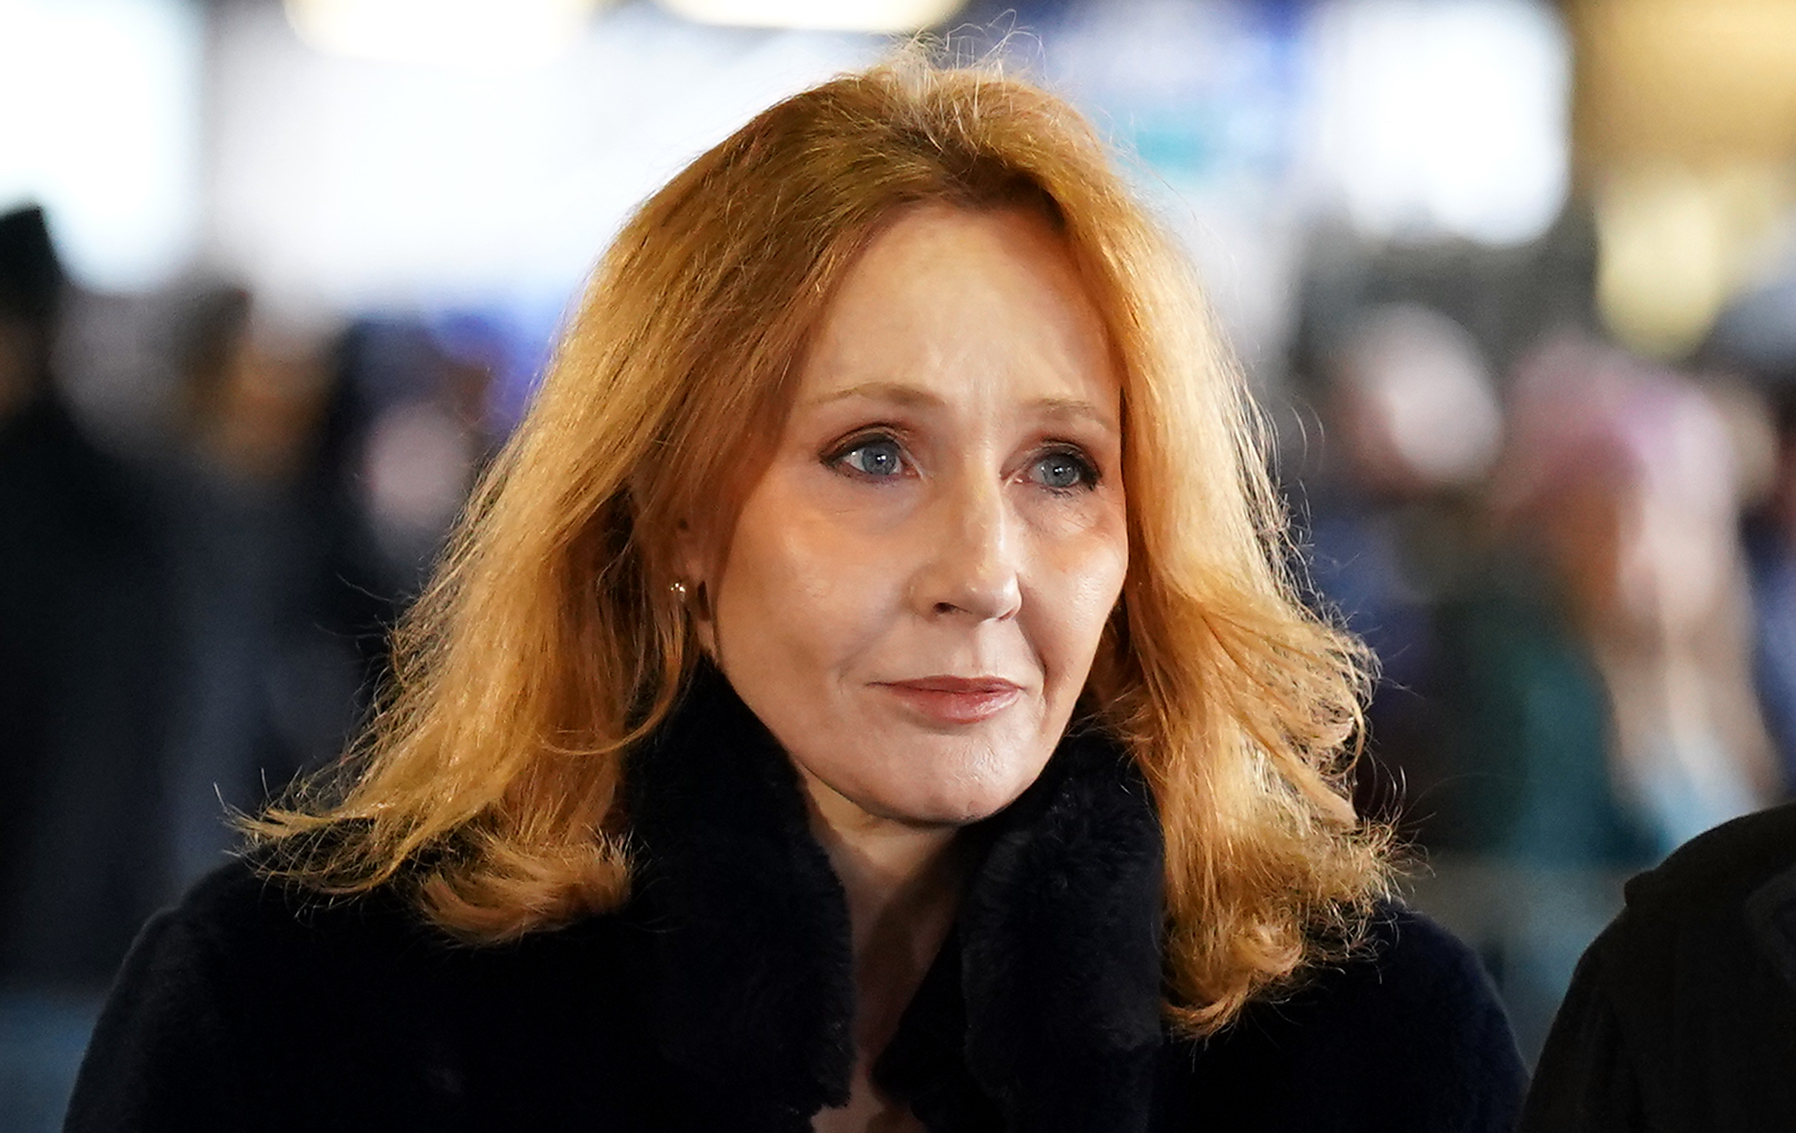 JK Rowling Responds to Accusations of ‘Cruelty’ Regarding Trans-Identifying Soccer Manager Comments